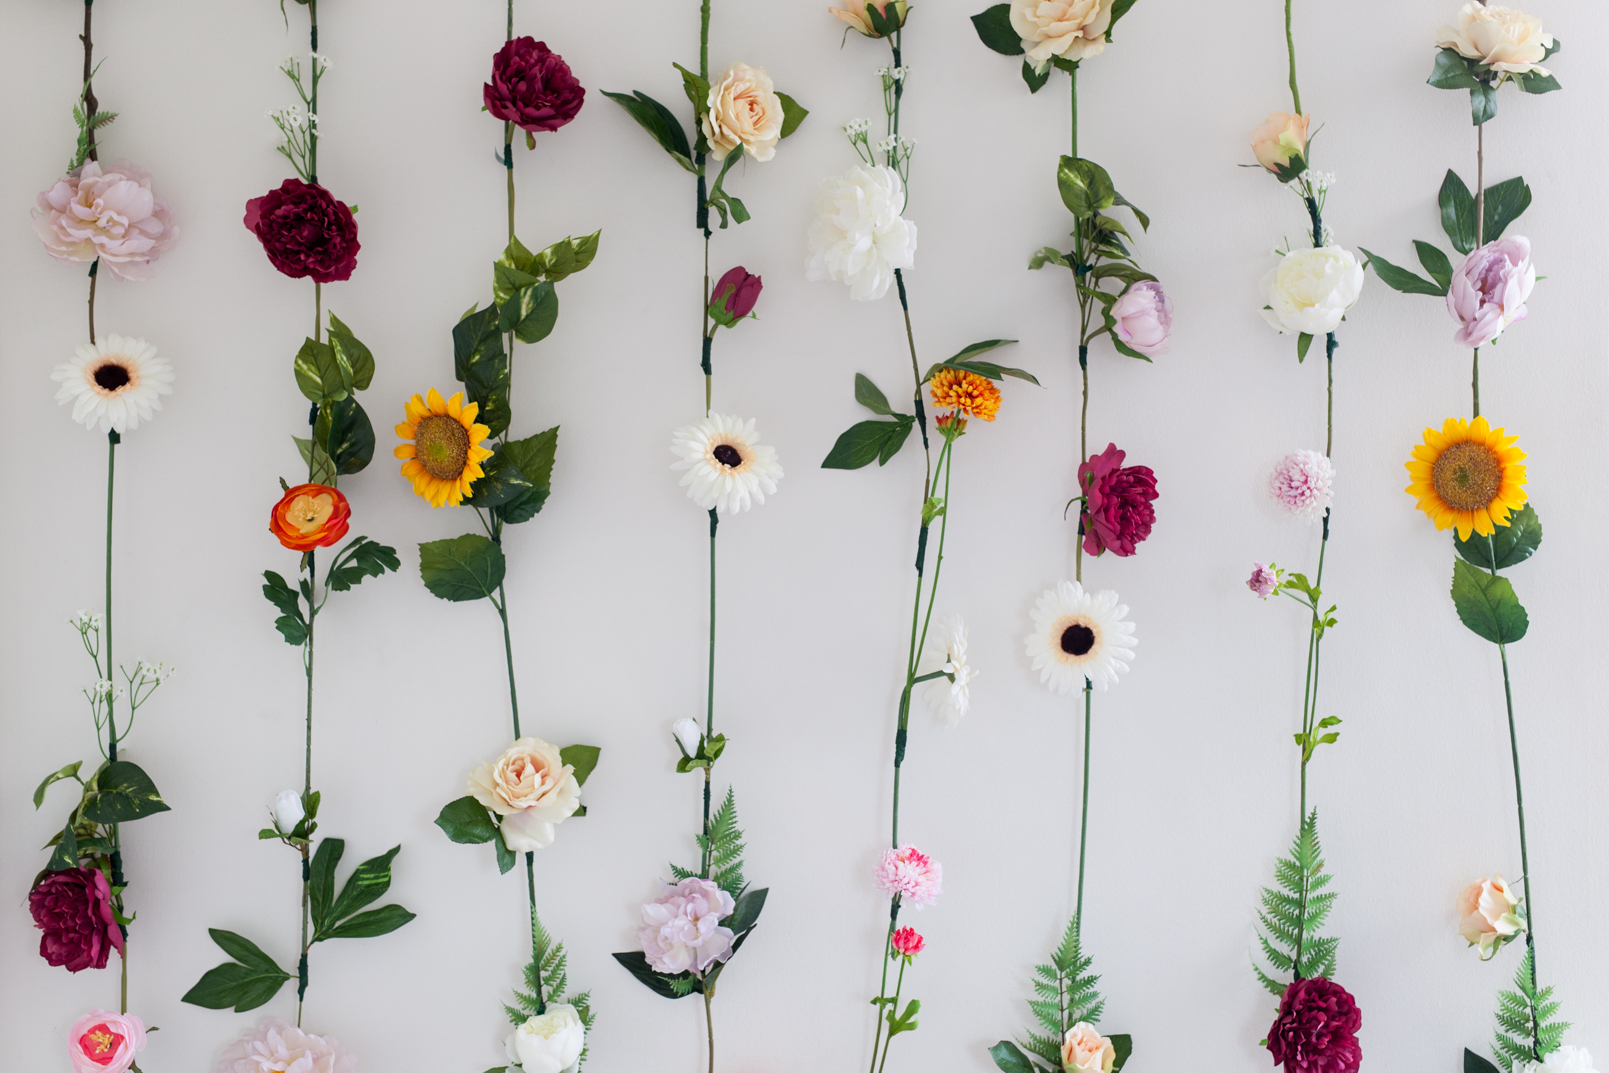 DIY Flower Dangles That Are Easy To Make